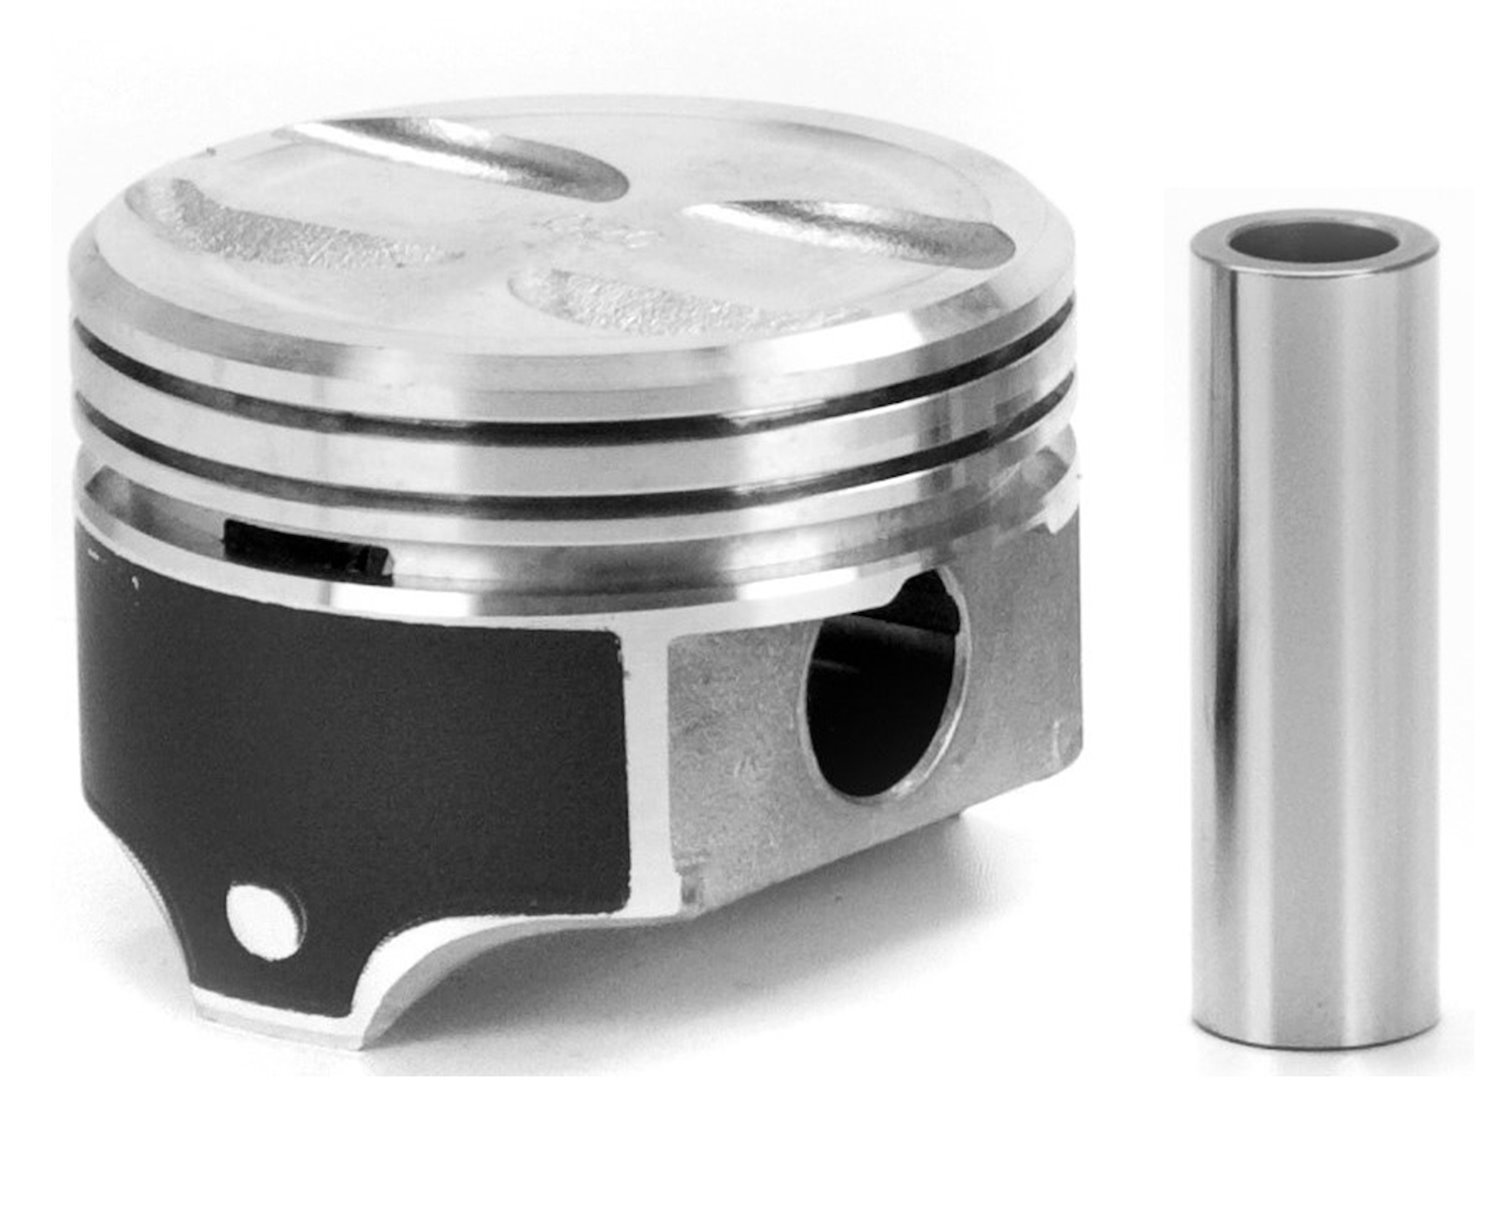 Silv-O-Lite Dish Piston Set w/Coated Skirts for Small